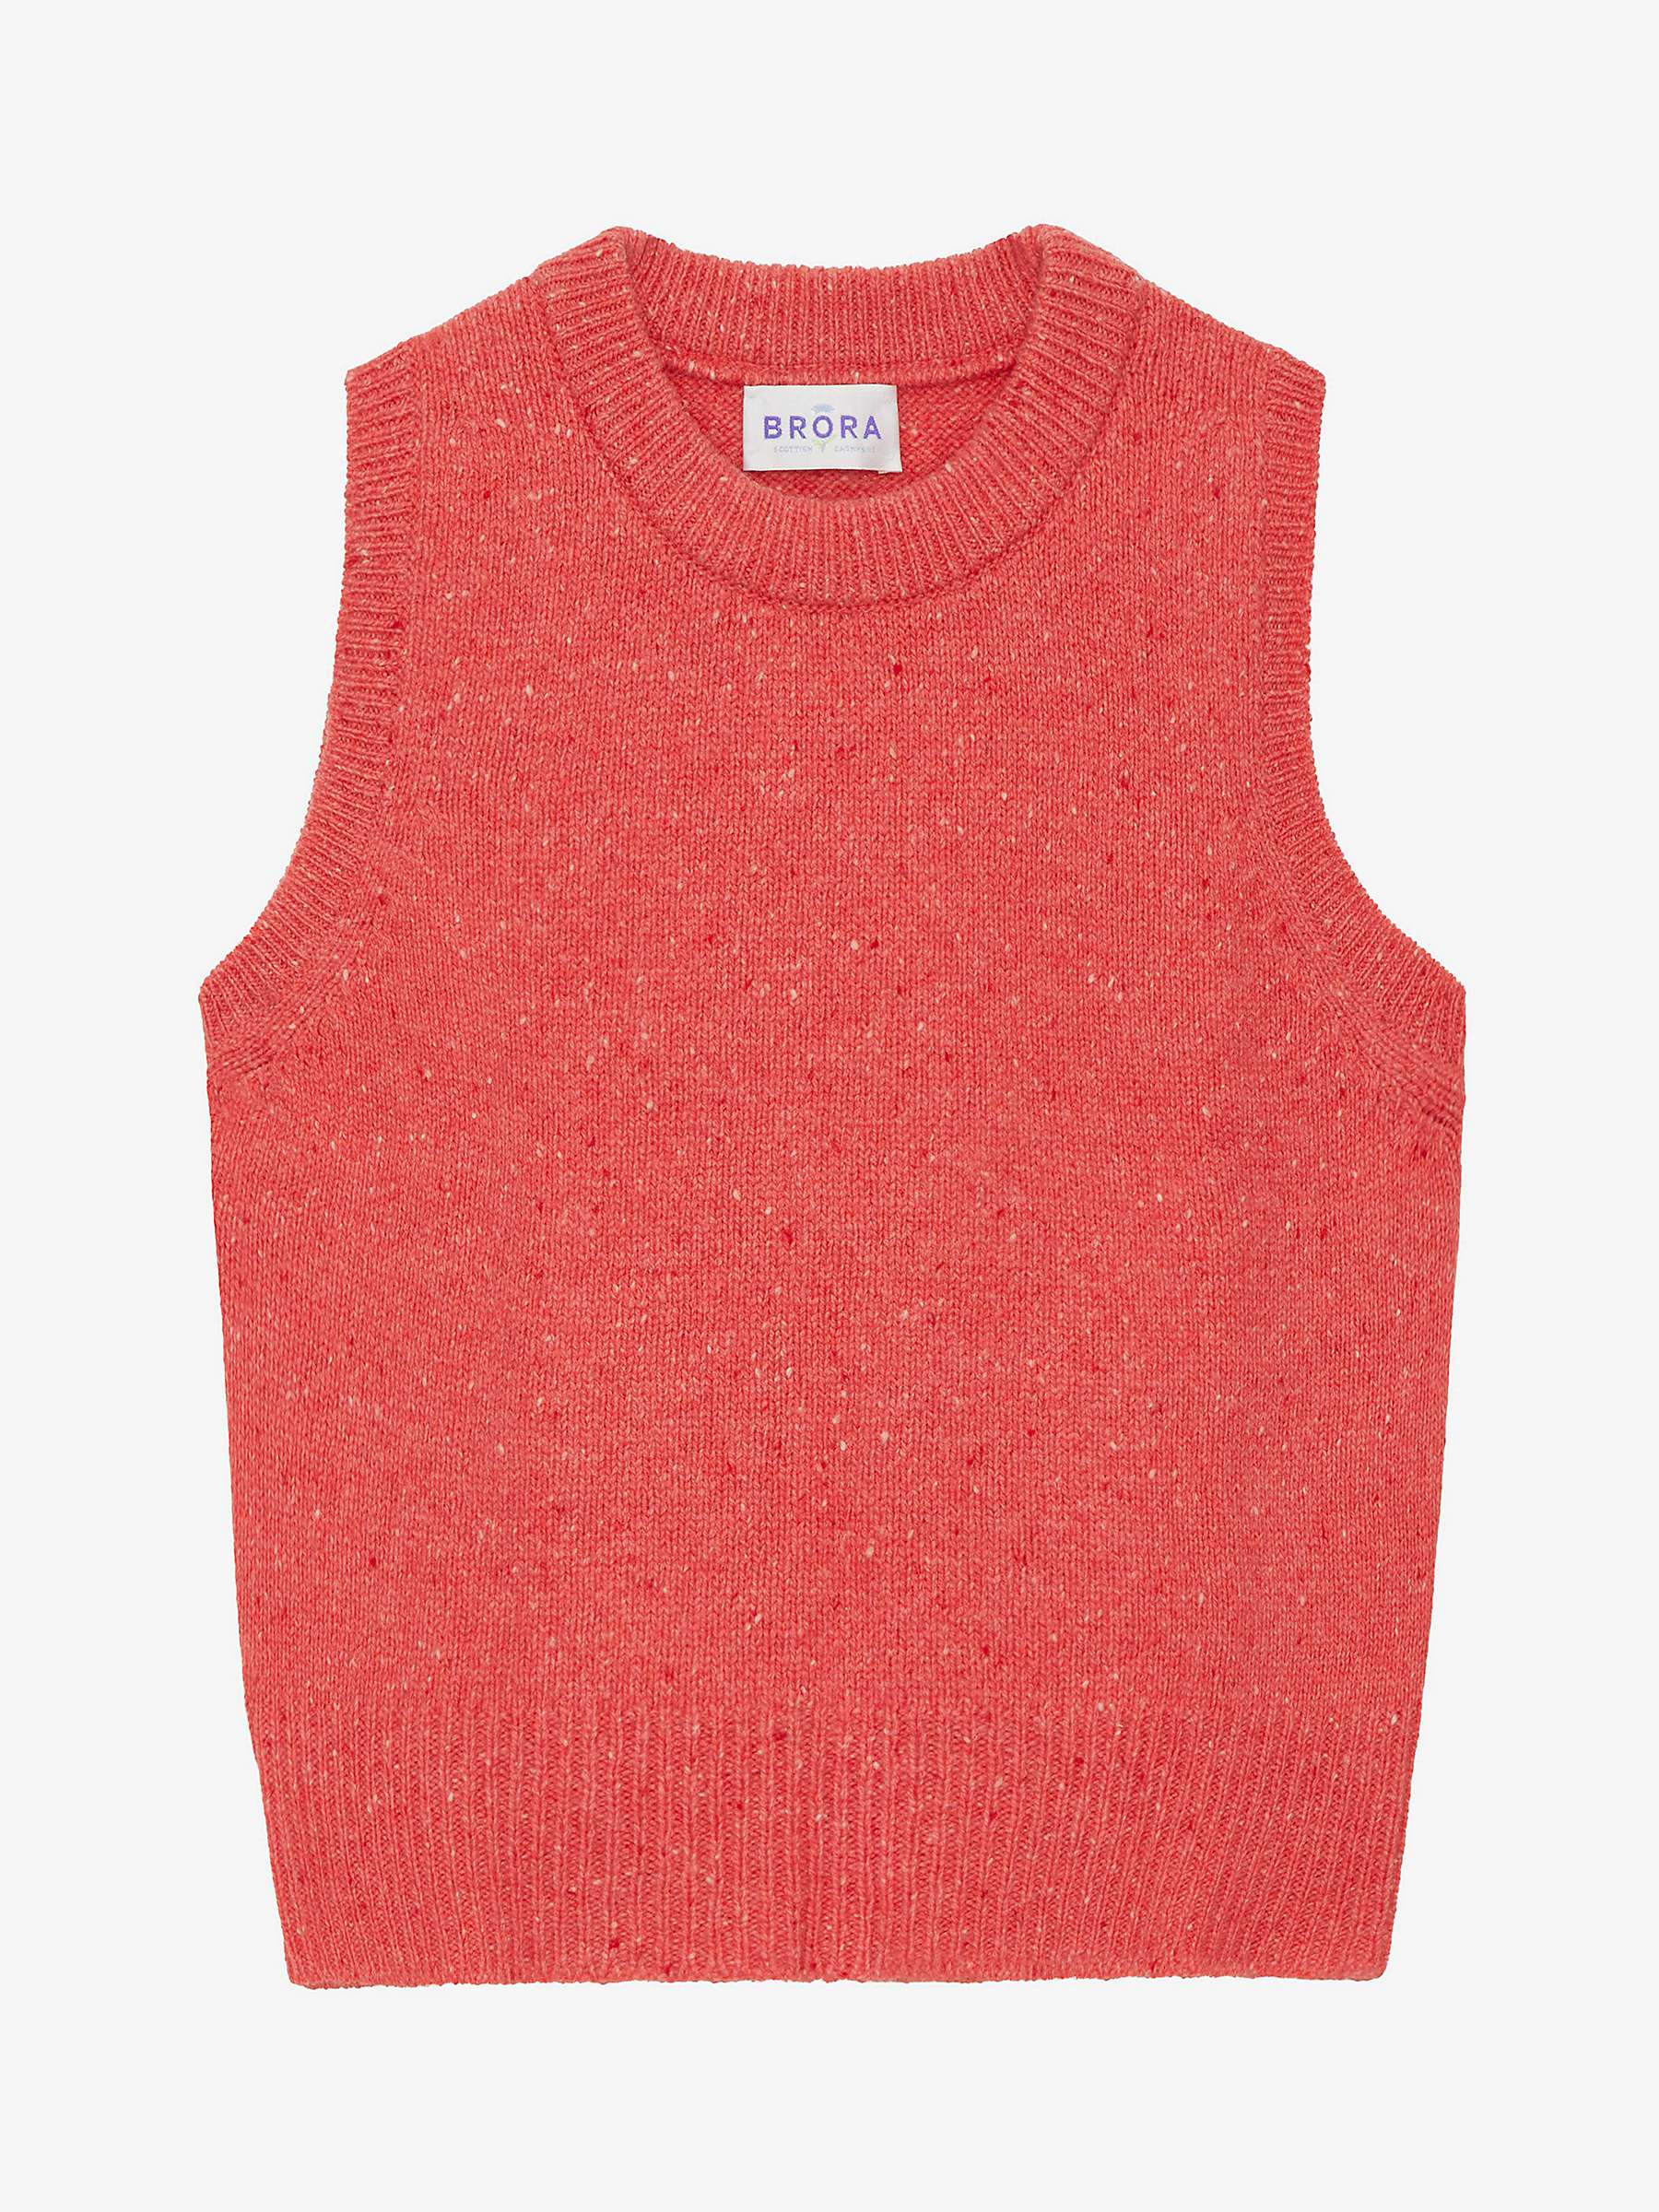 Buy Brora Cashmere Donegal Tank Top, Flamingo Online at johnlewis.com